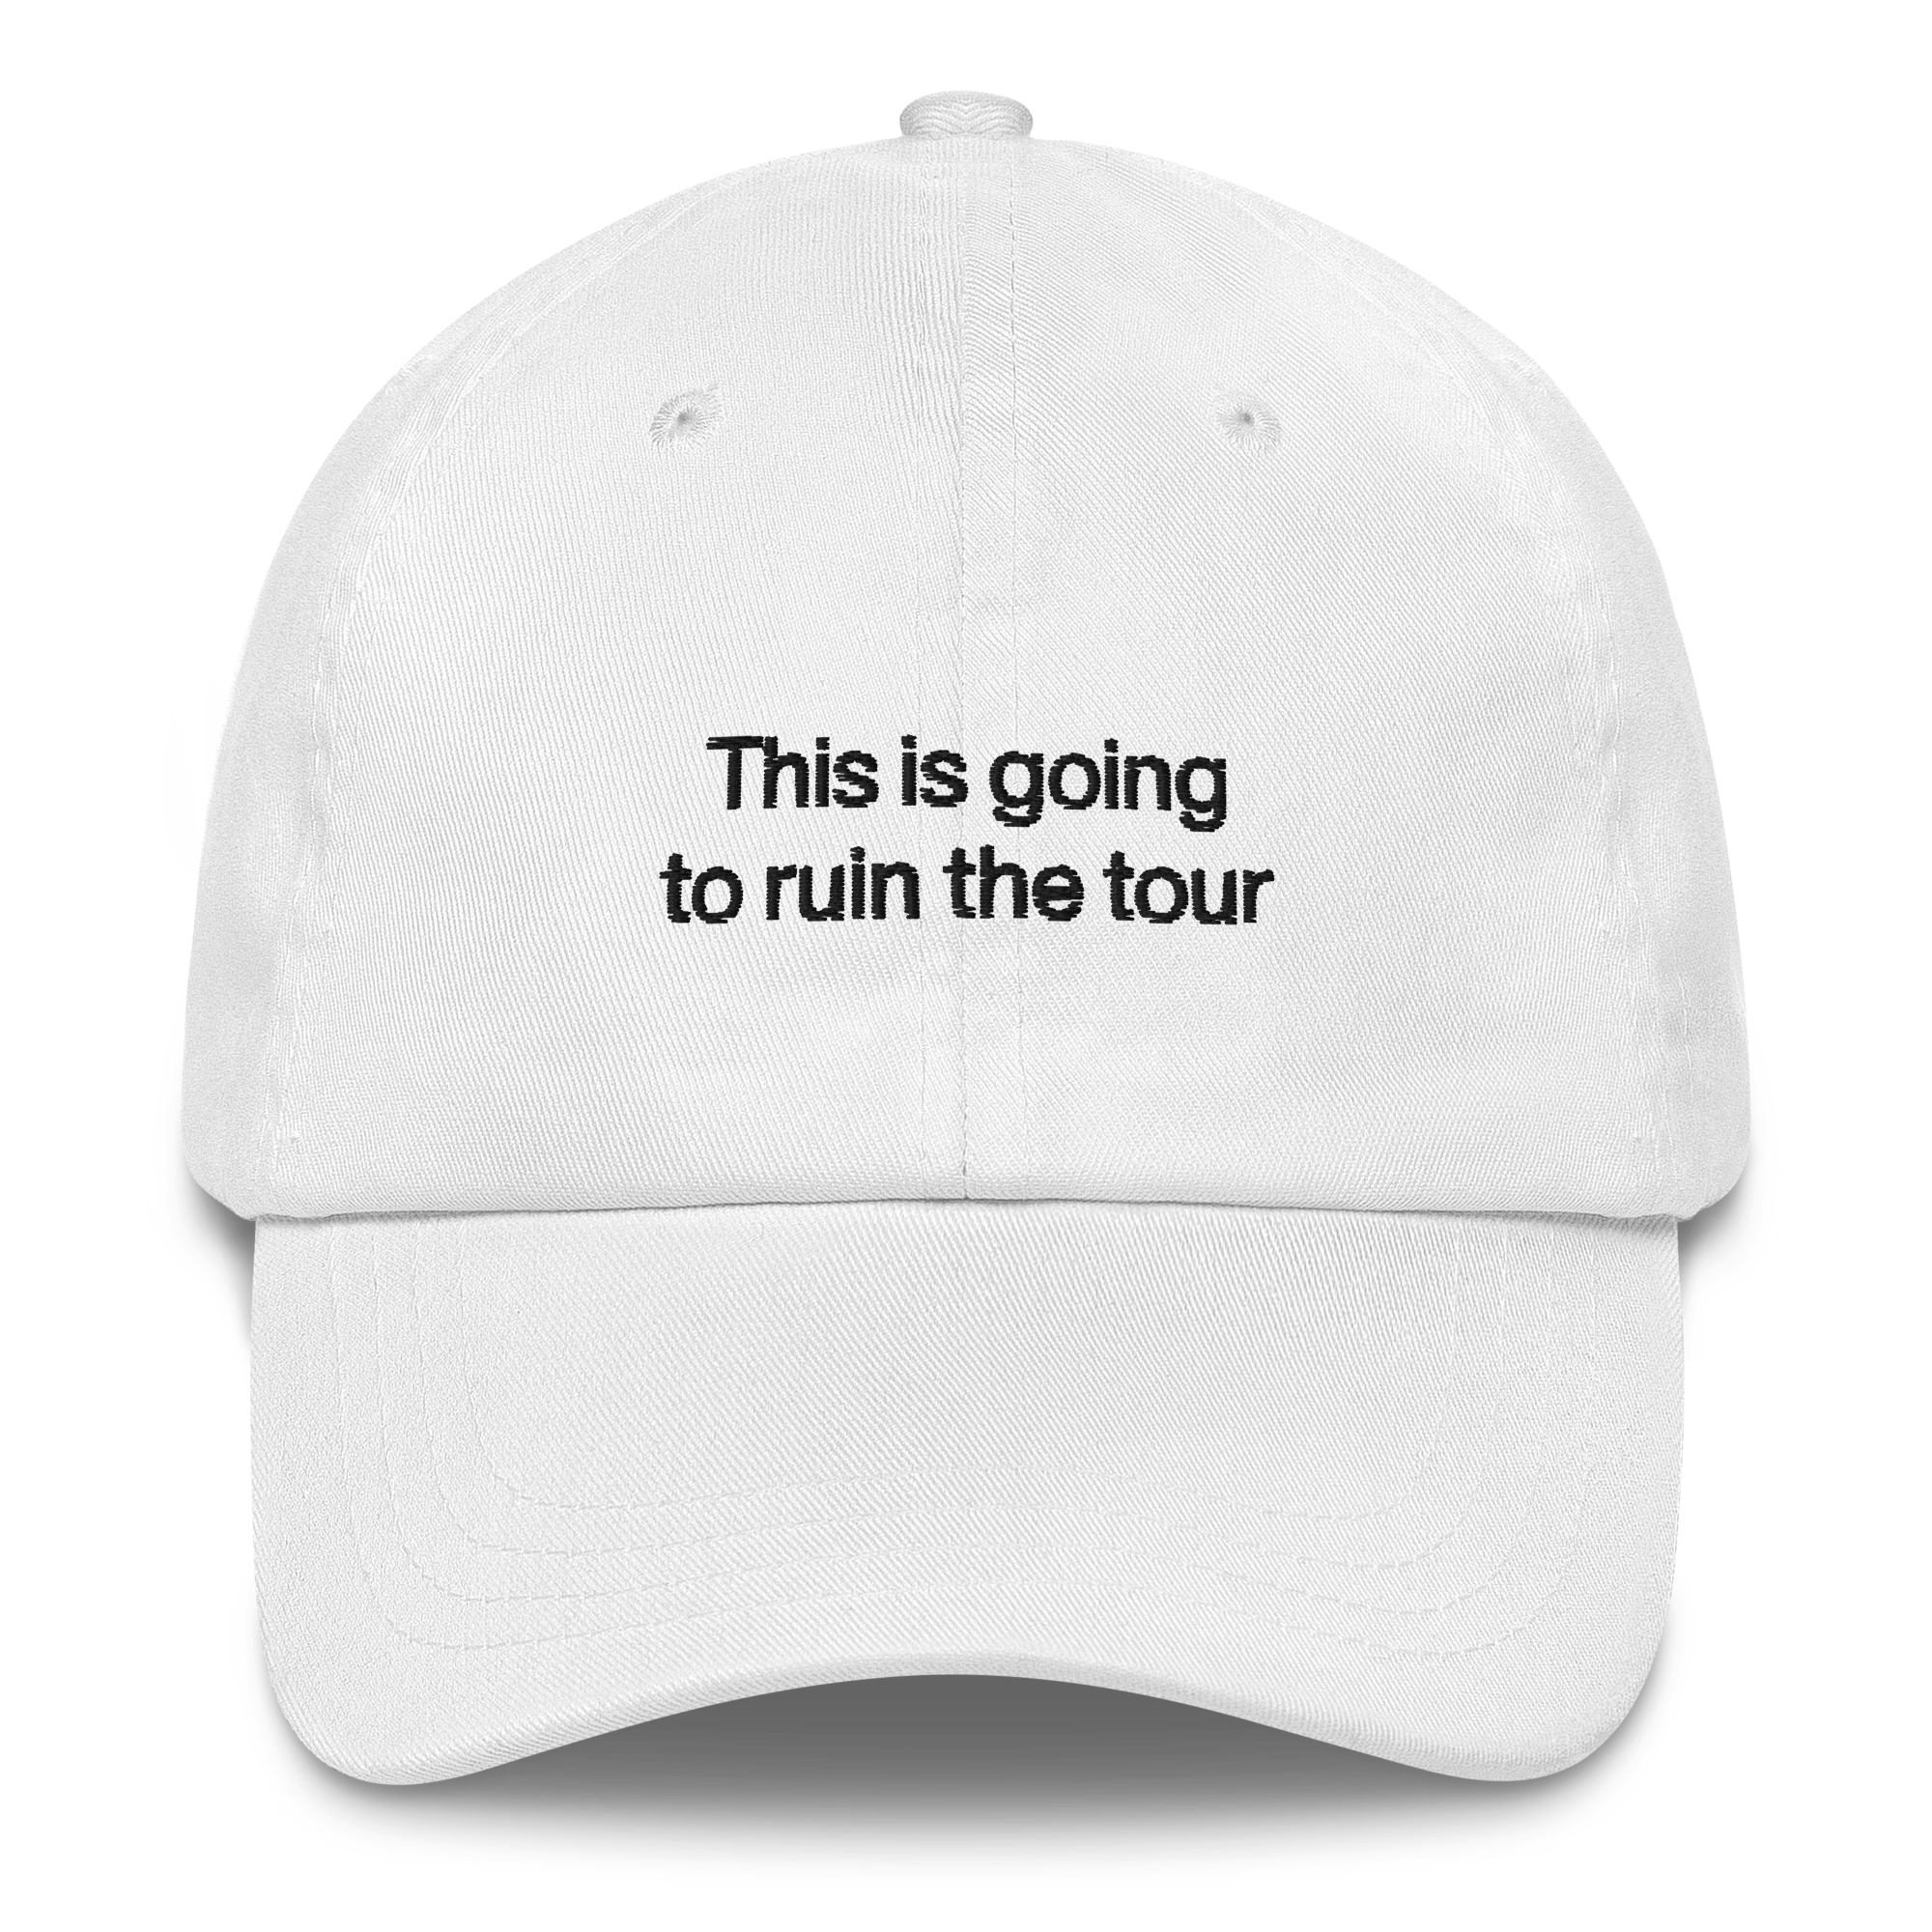 classic-dad-hat-white-front-667598bdf1b9d.png